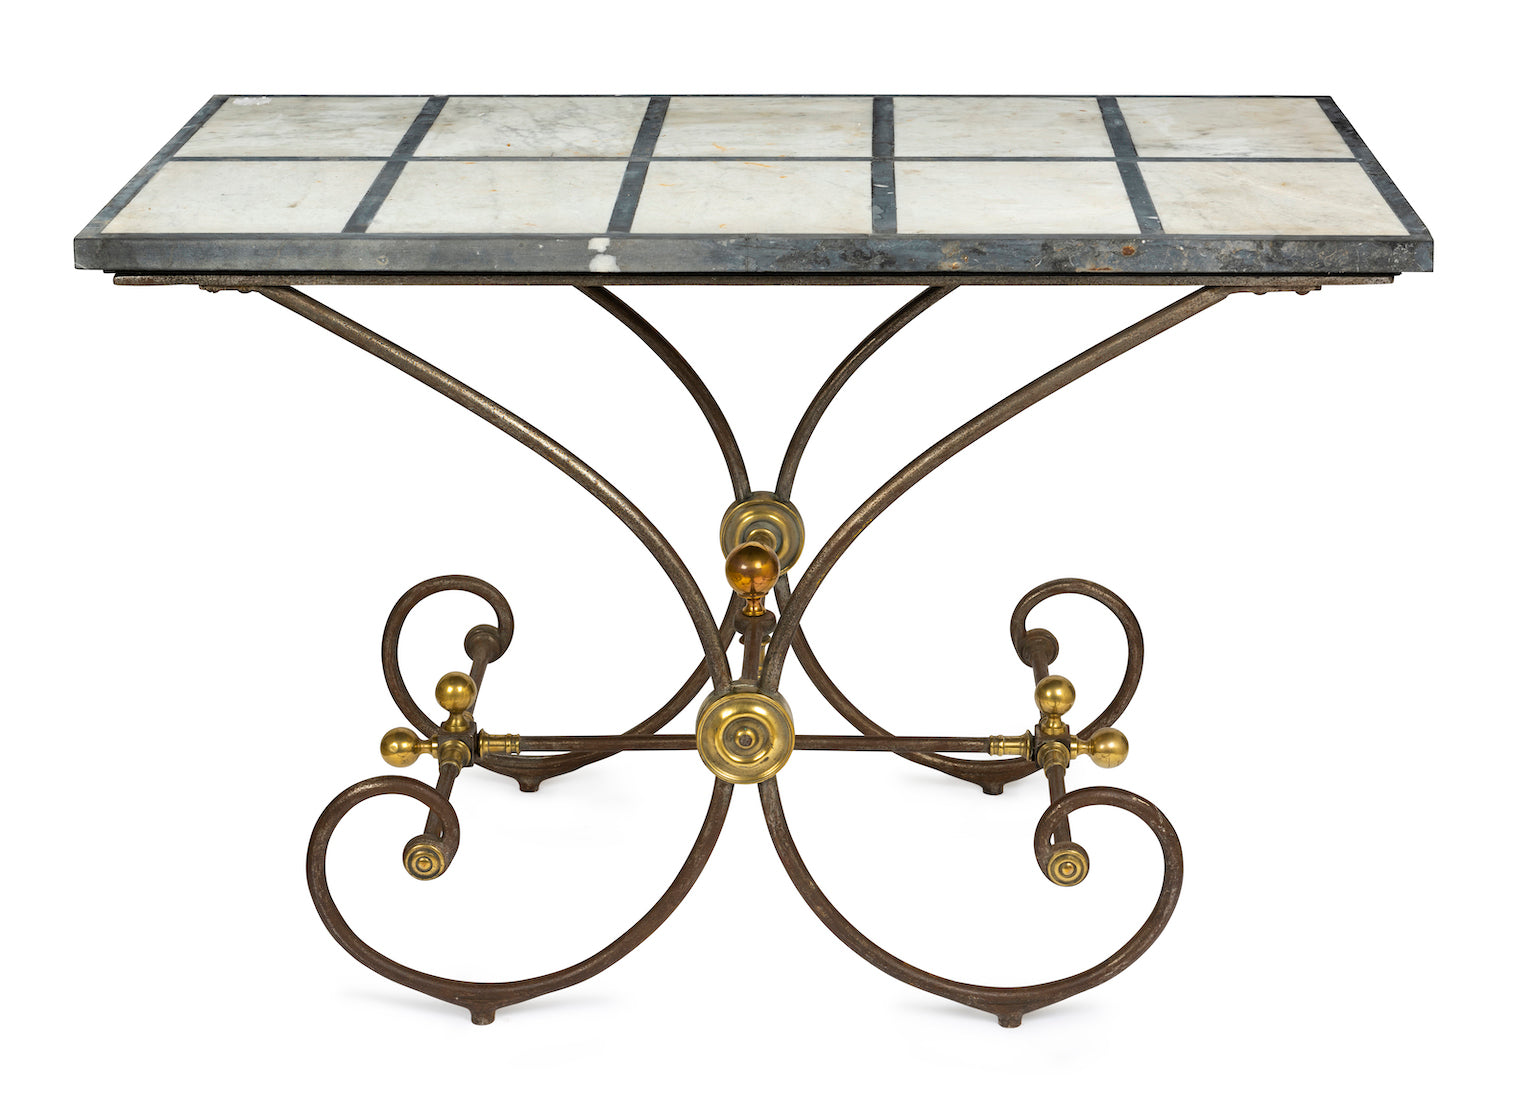 SOLD A French Provincial steel and brass patisserie table, 19th Century